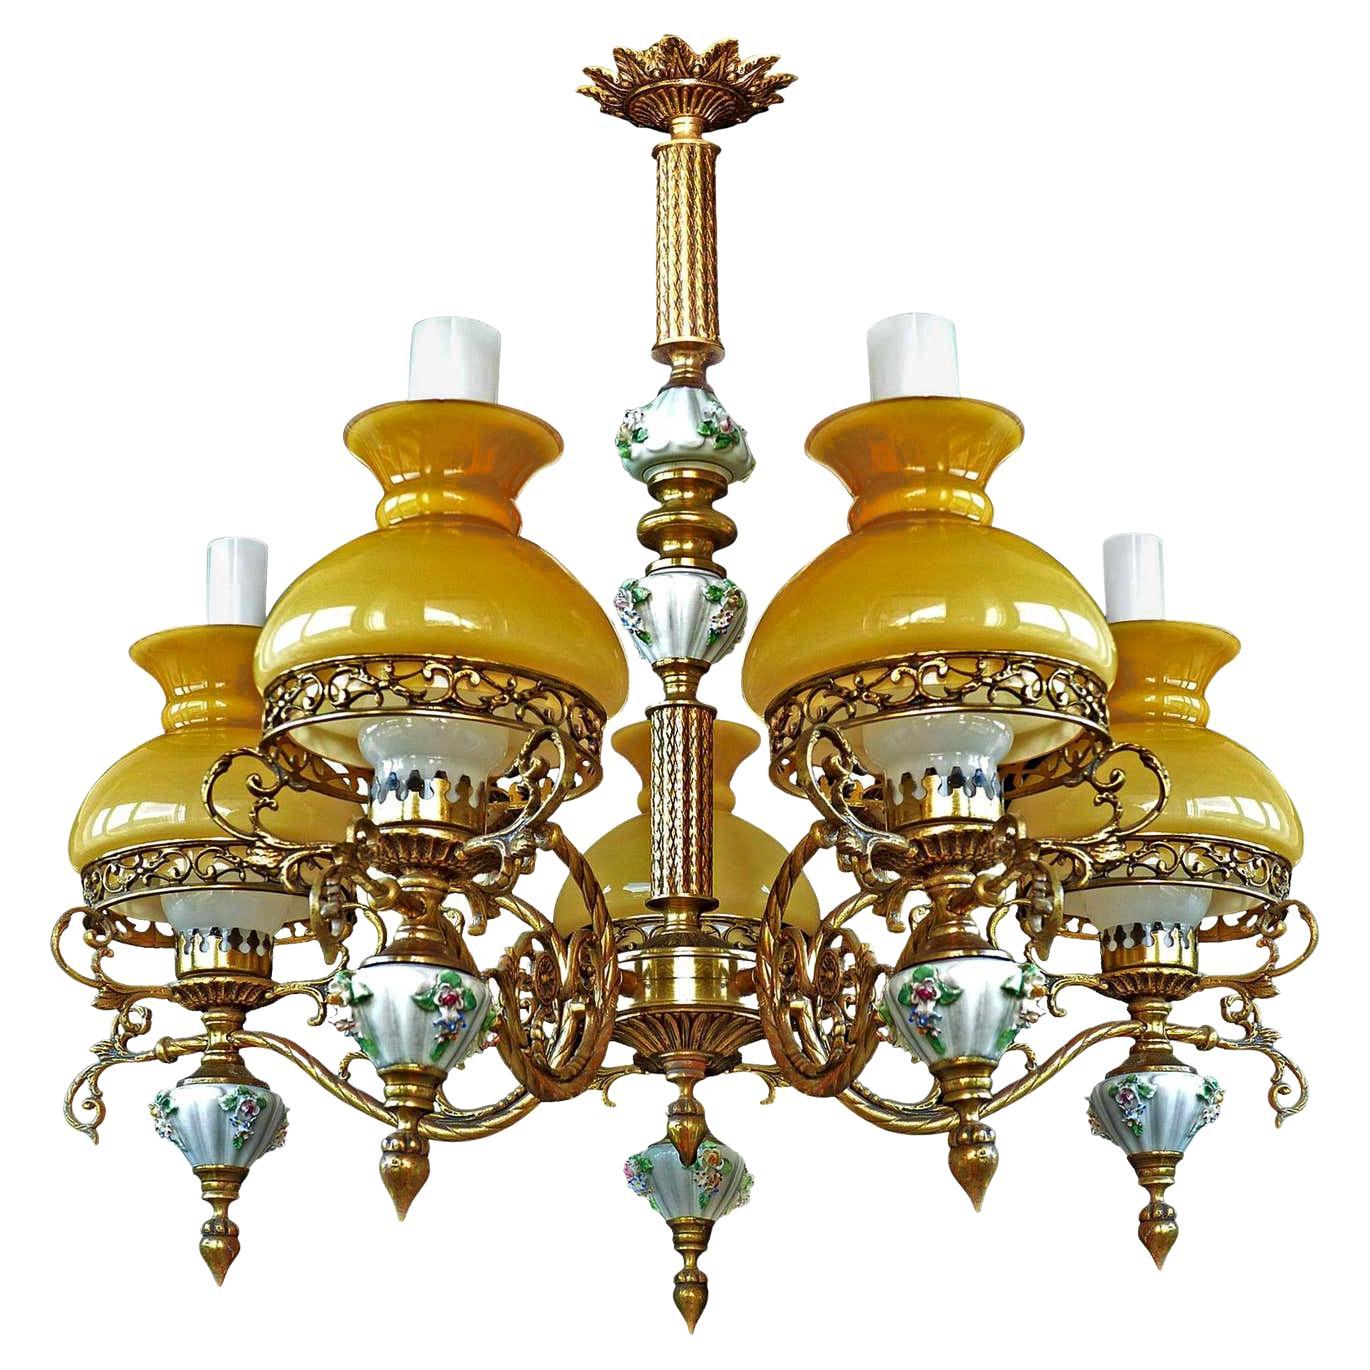 Victorian Chandelier with Porcelain Flowers, Gilt Bronze & Amber Glass Globes